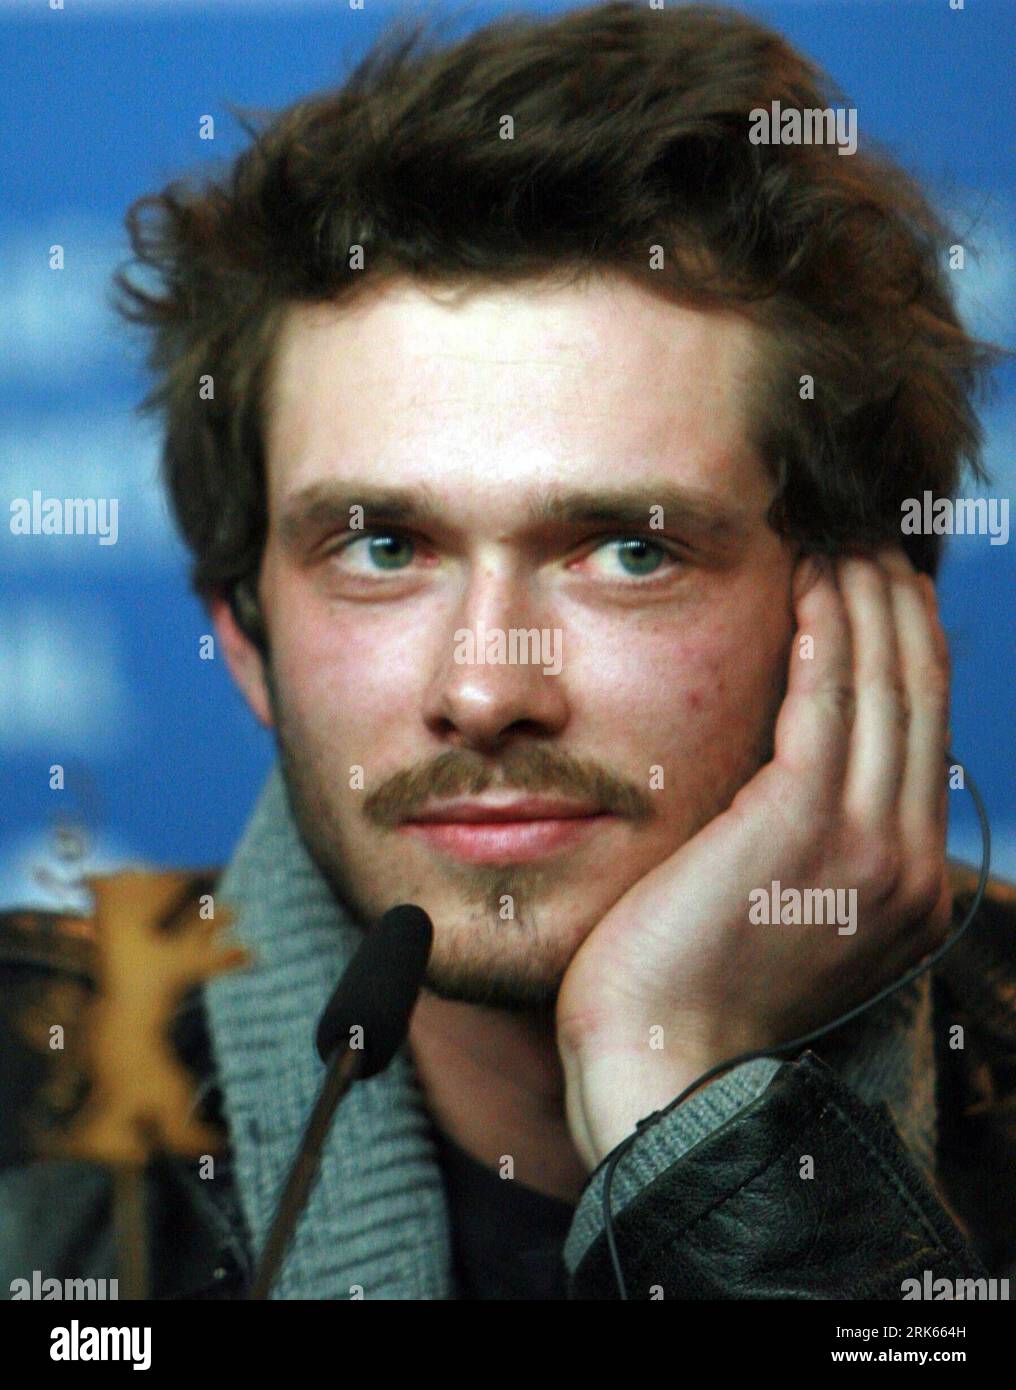 Bildnummer: 53803209  Datum: 17.02.2010  Copyright: imago/Xinhua (100217) -- BERLIN, Feb. 17, 2010 (Xinhua) -- Grigoriy Dobrygin, the main actor of the film How I Ended This Summer , attends a press conference during the 60th Berlin International Film Festival in Berlin, capital of Germany, Feb. 17, 2010. Twenty pictures are vying for the coveted Golden Bear top prize at the film festival taking place from February 11 to 21, 2010. (Xinhua/Luo Huanhuan) (gxr) (3)GERMANY-HOW I ENDED THIS SUMMER PUBLICATIONxNOTxINxCHN People Film 60. Internationale Filmfestspiele Berlinale Berlin Pressekonferenz Stock Photo